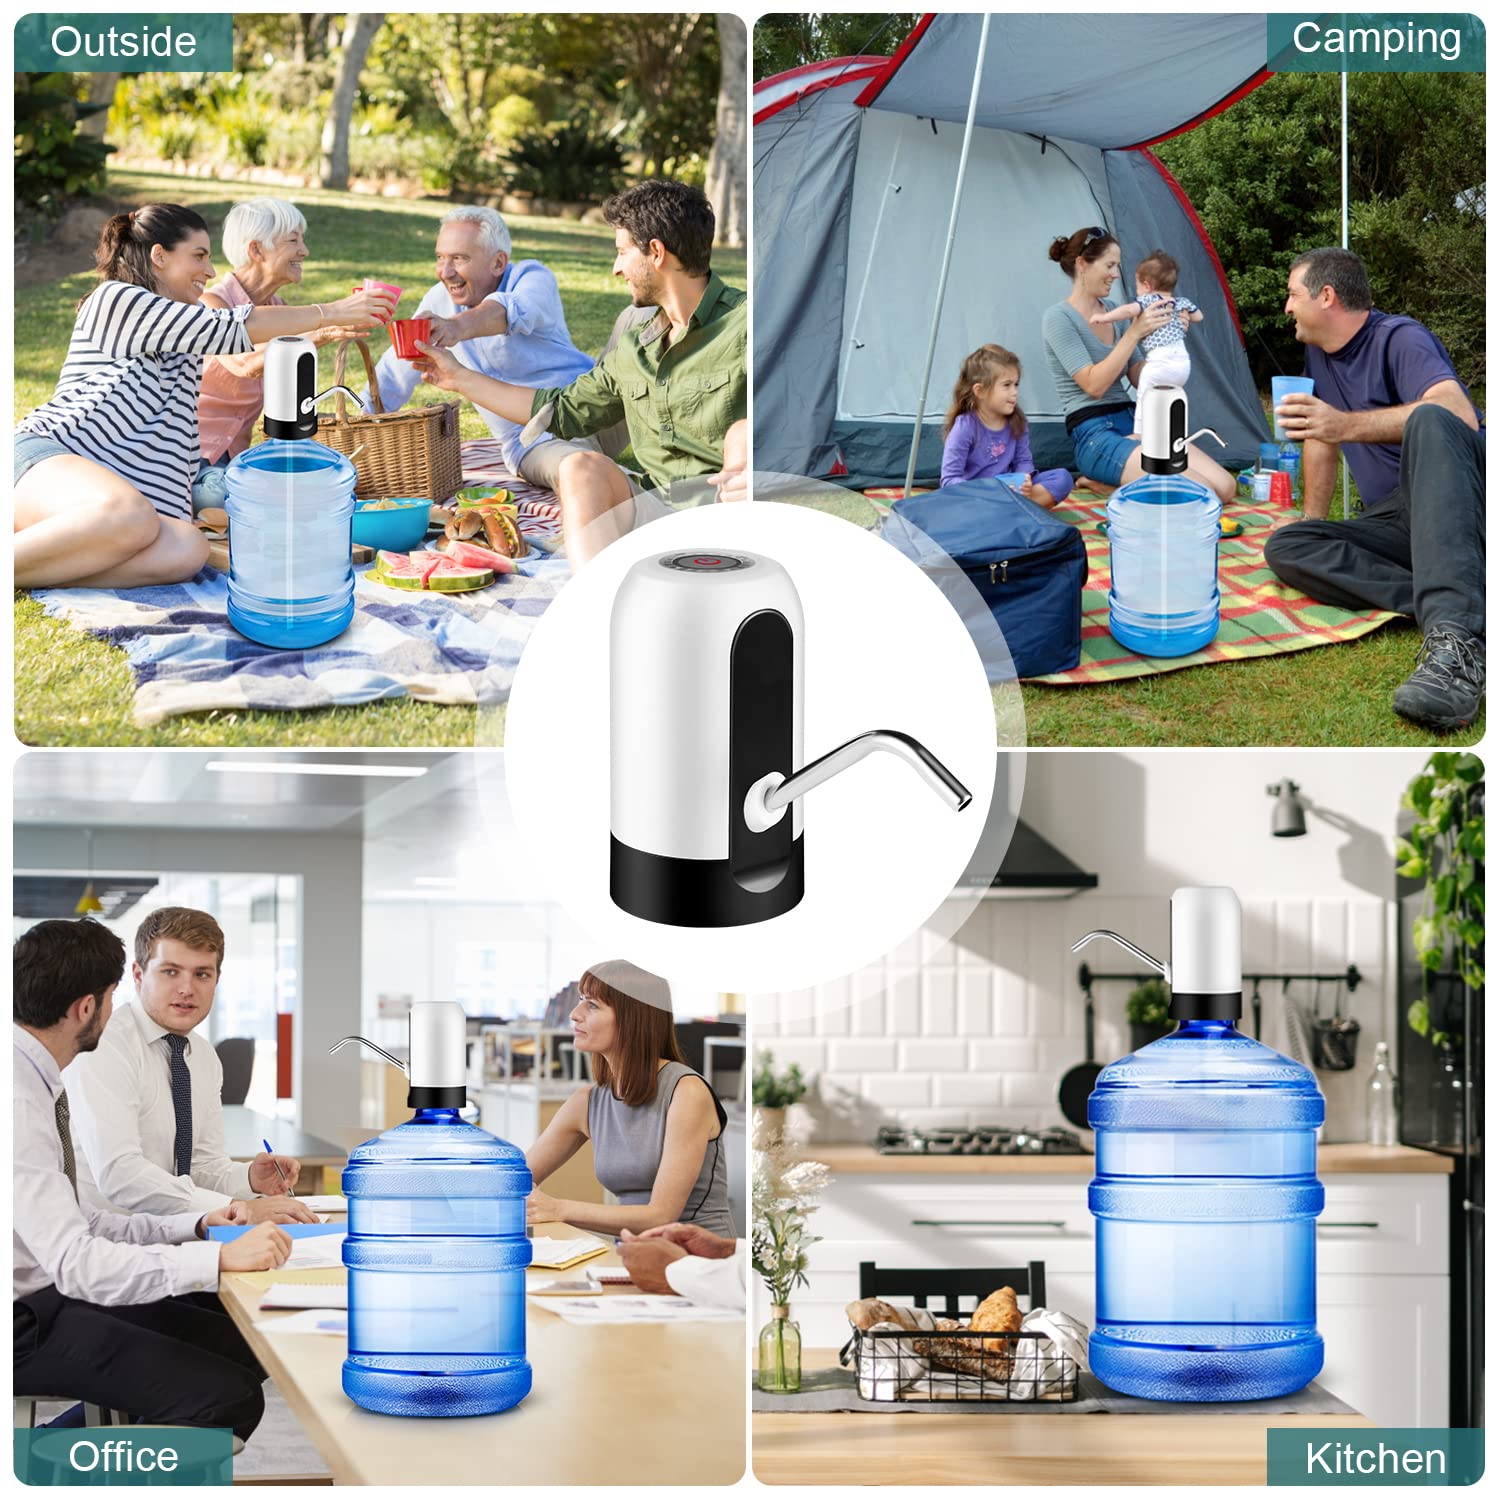 5 Gallon Water Dispenser, LONEASY Portable USB Charging Electric Drinking Water Pump for 5 Gallon Bottle, Automatic Water Jug Dispenser Water Bottle Pump for Home Kitchen Office Camping